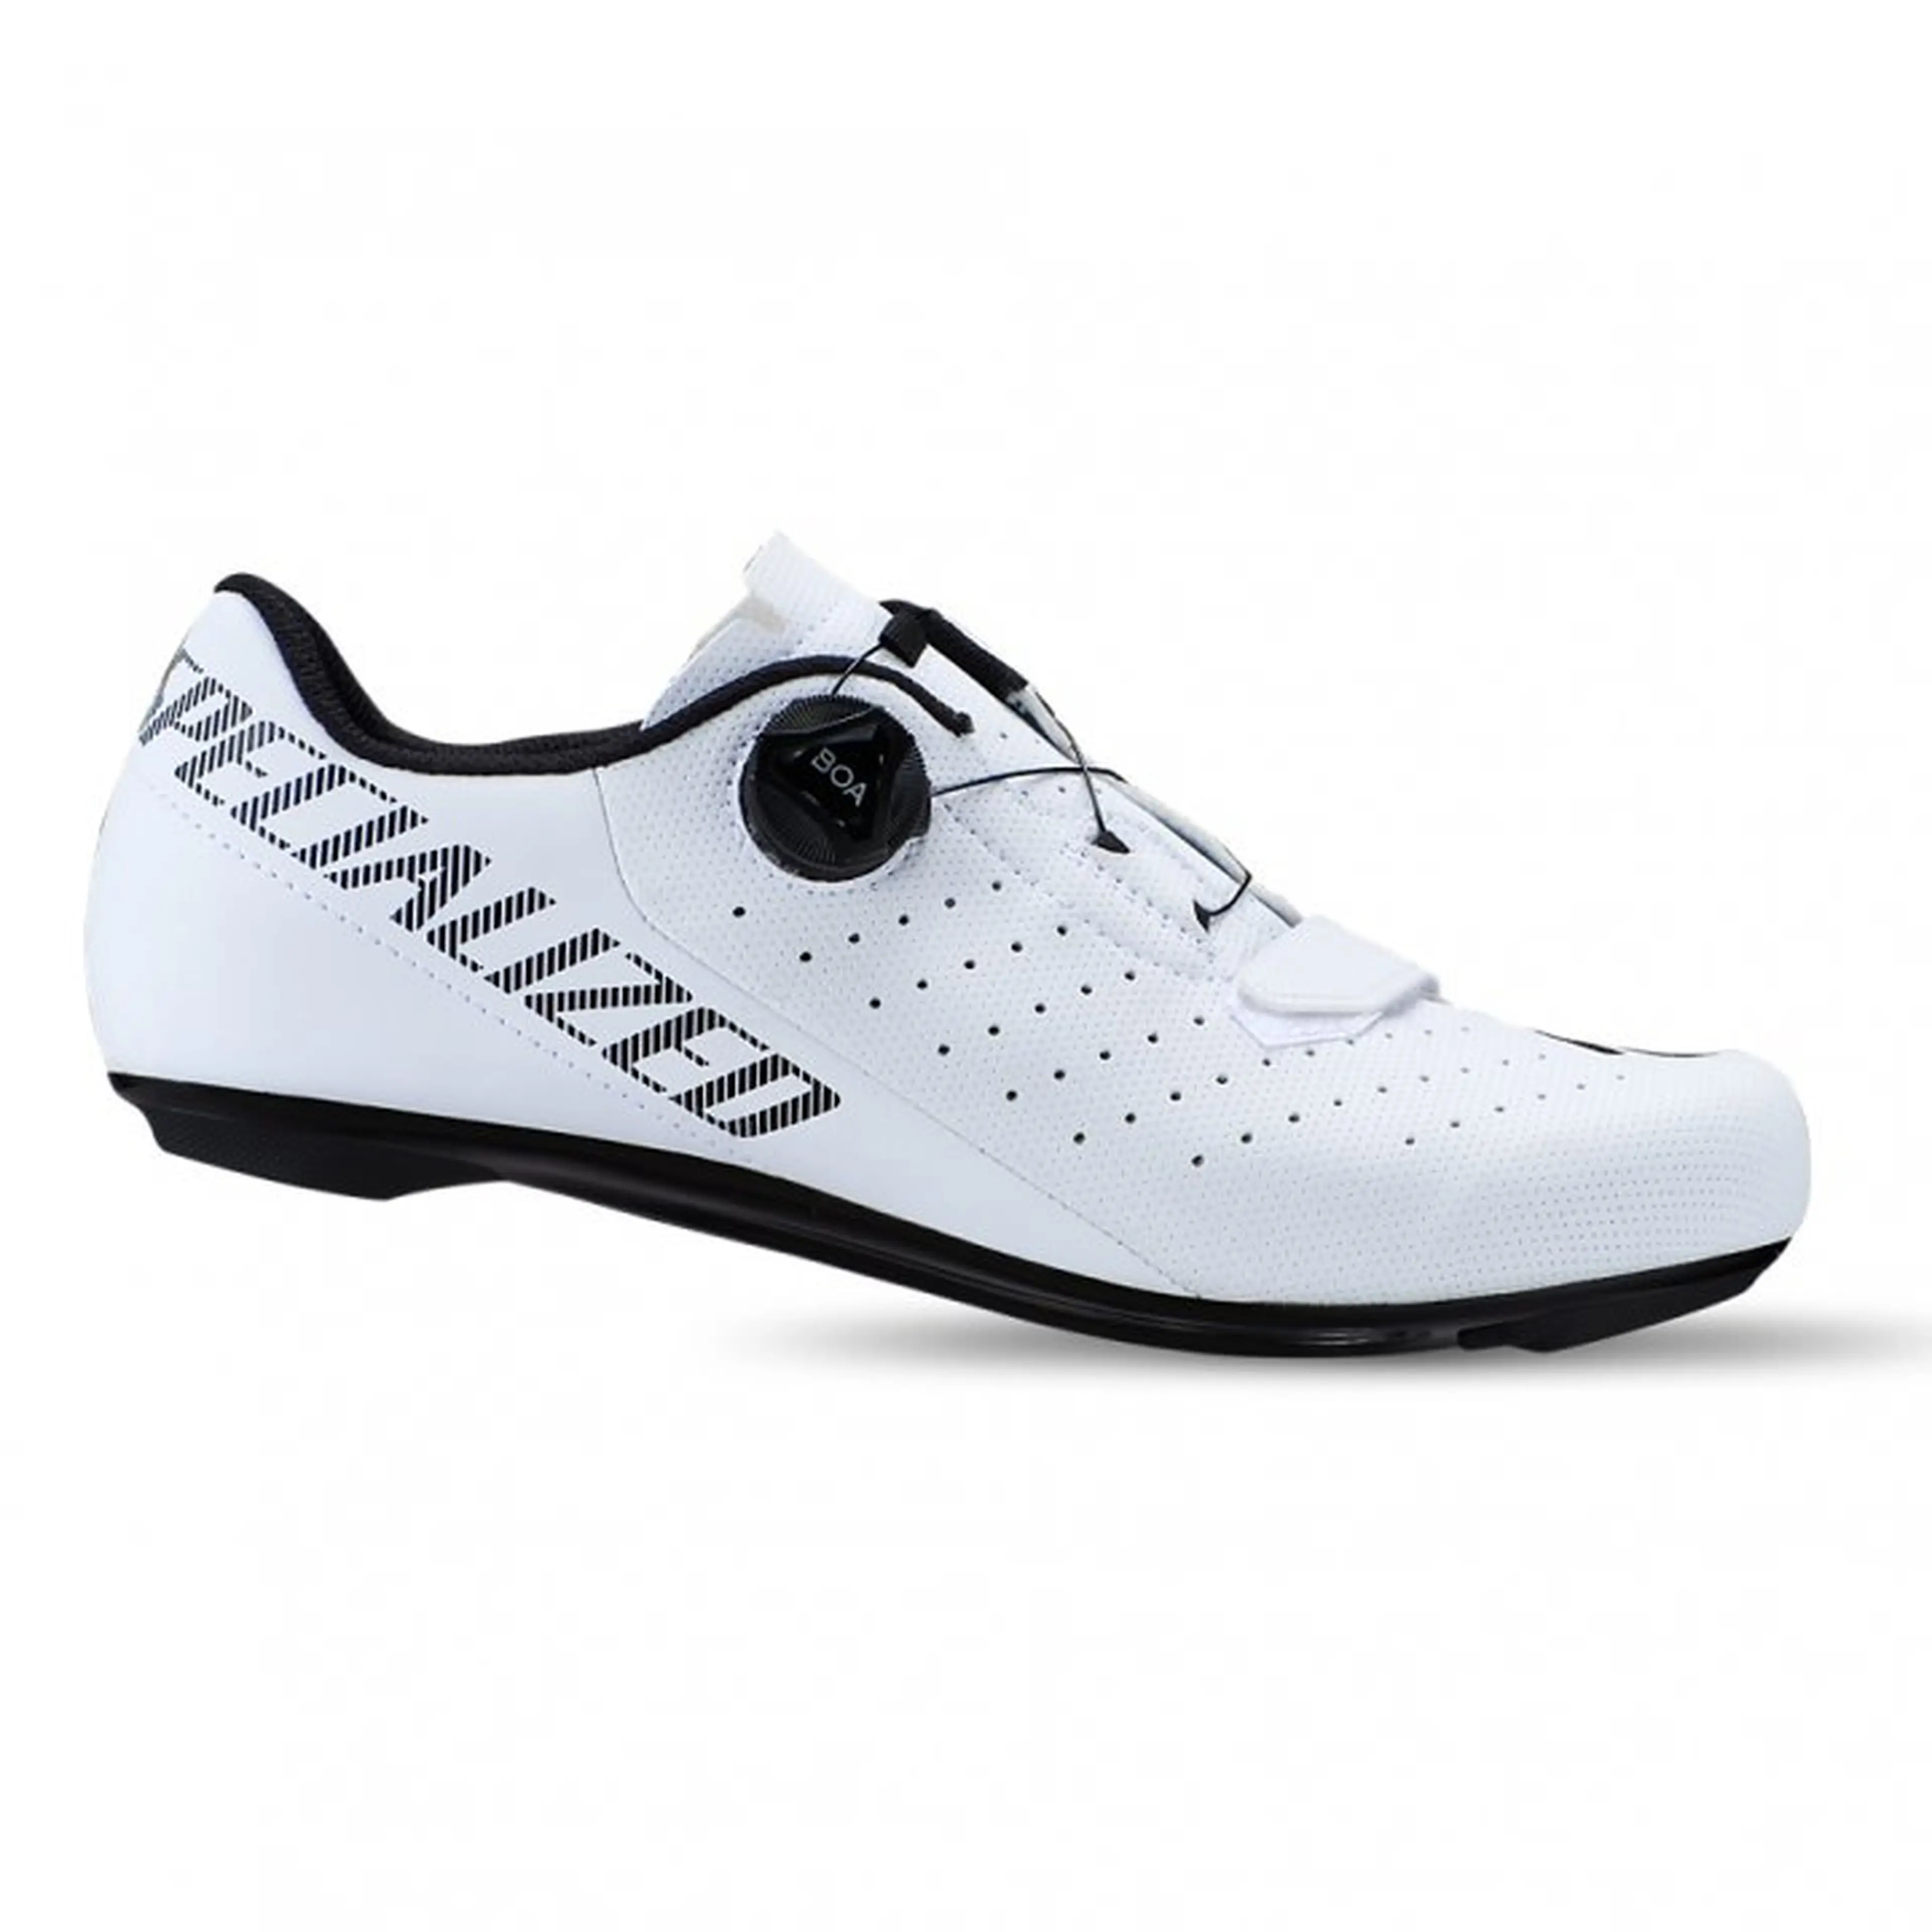 1. Pantofi ciclism Specialized Torch 1.0 Road